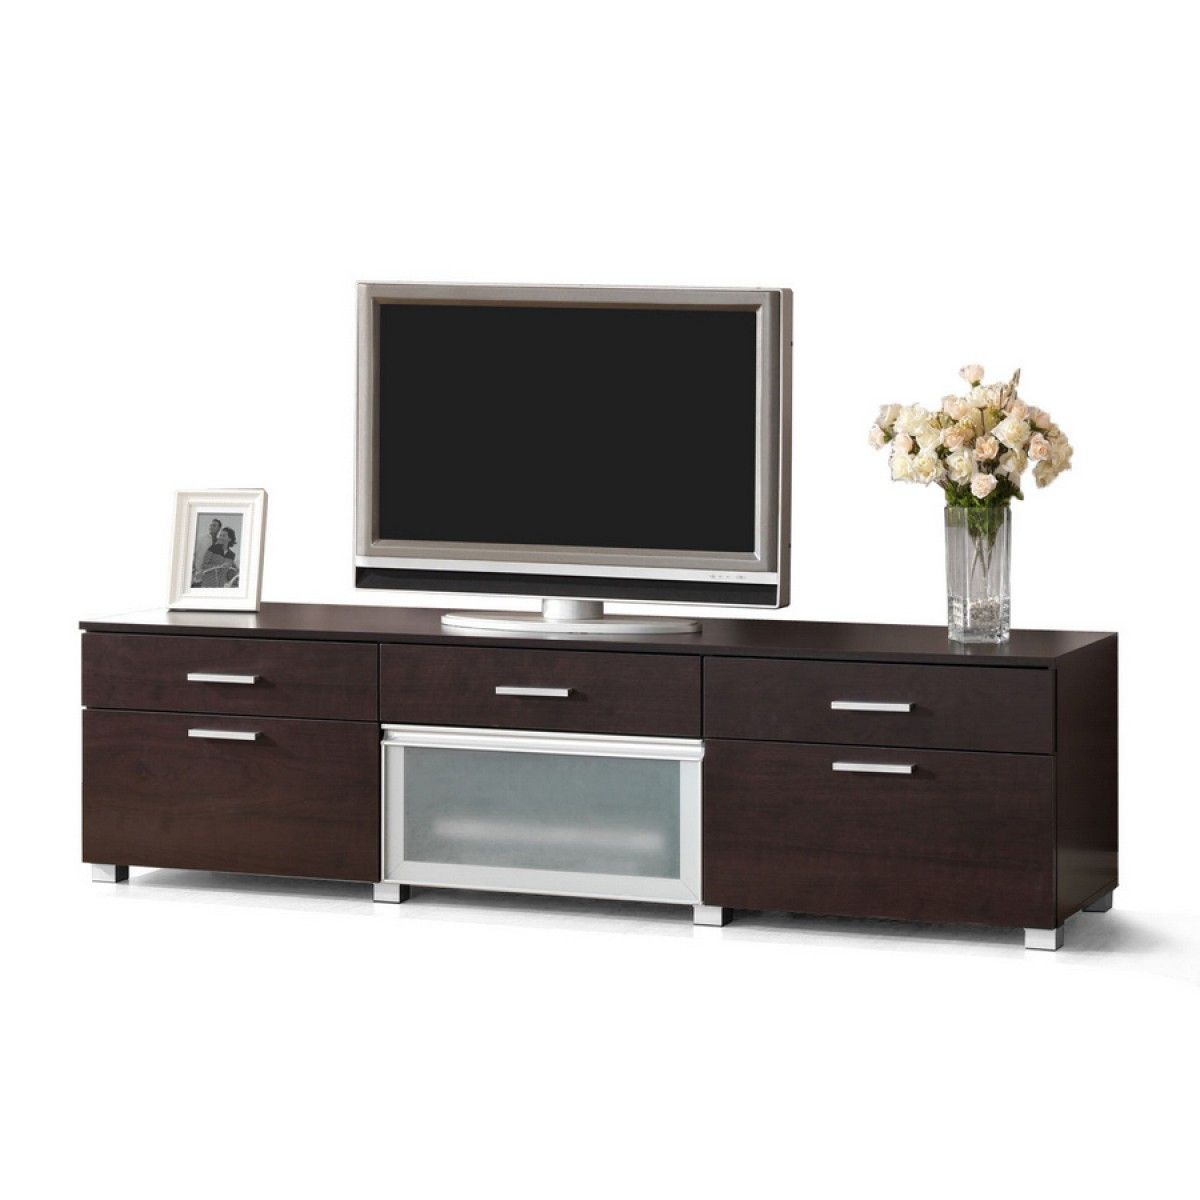 Basilio Dark Brown Modern Tv Stand | See White Within Brown Tv Stands (View 7 of 15)